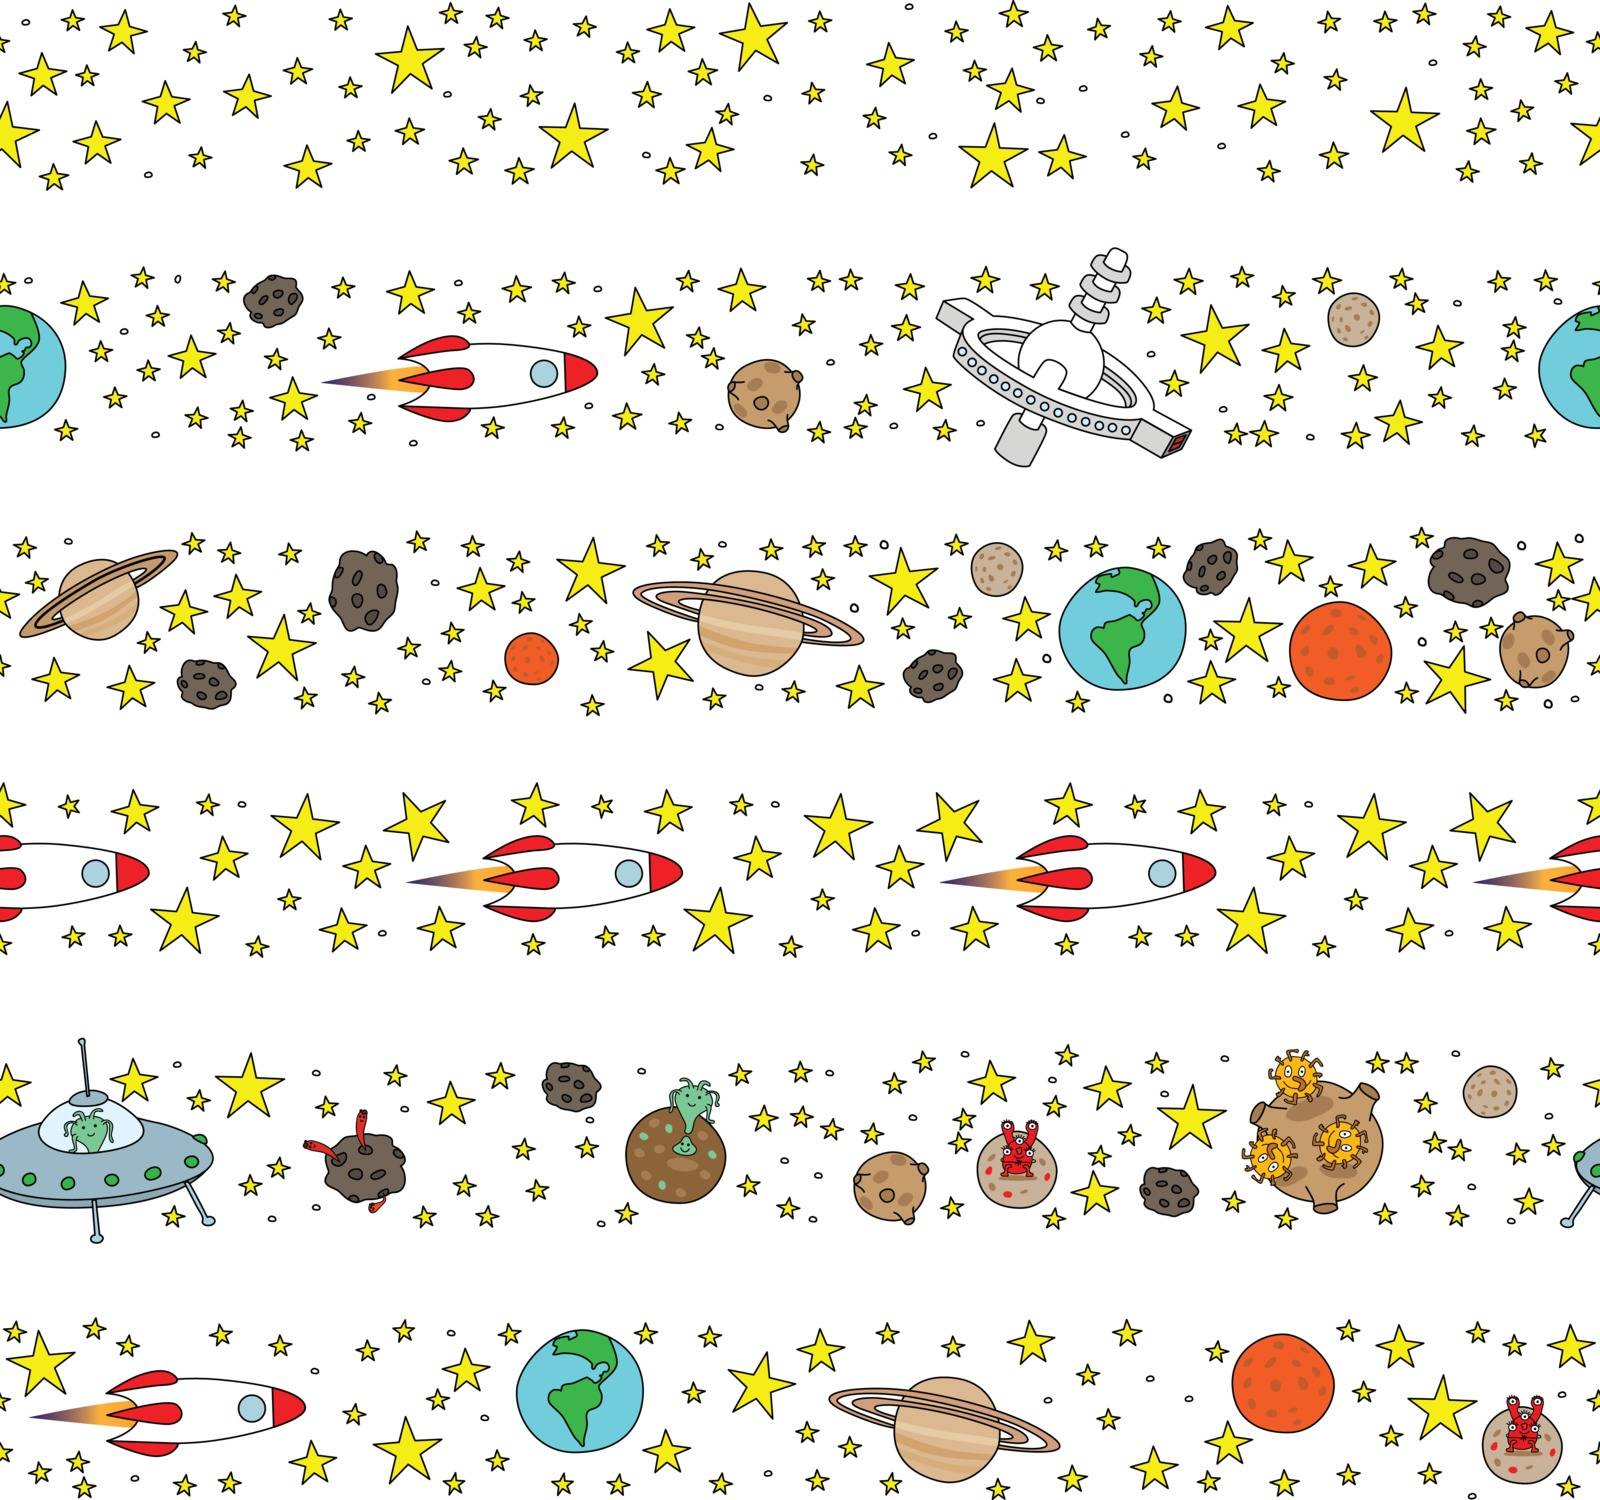 Set of six illustrated decorative borders made of stars and planets